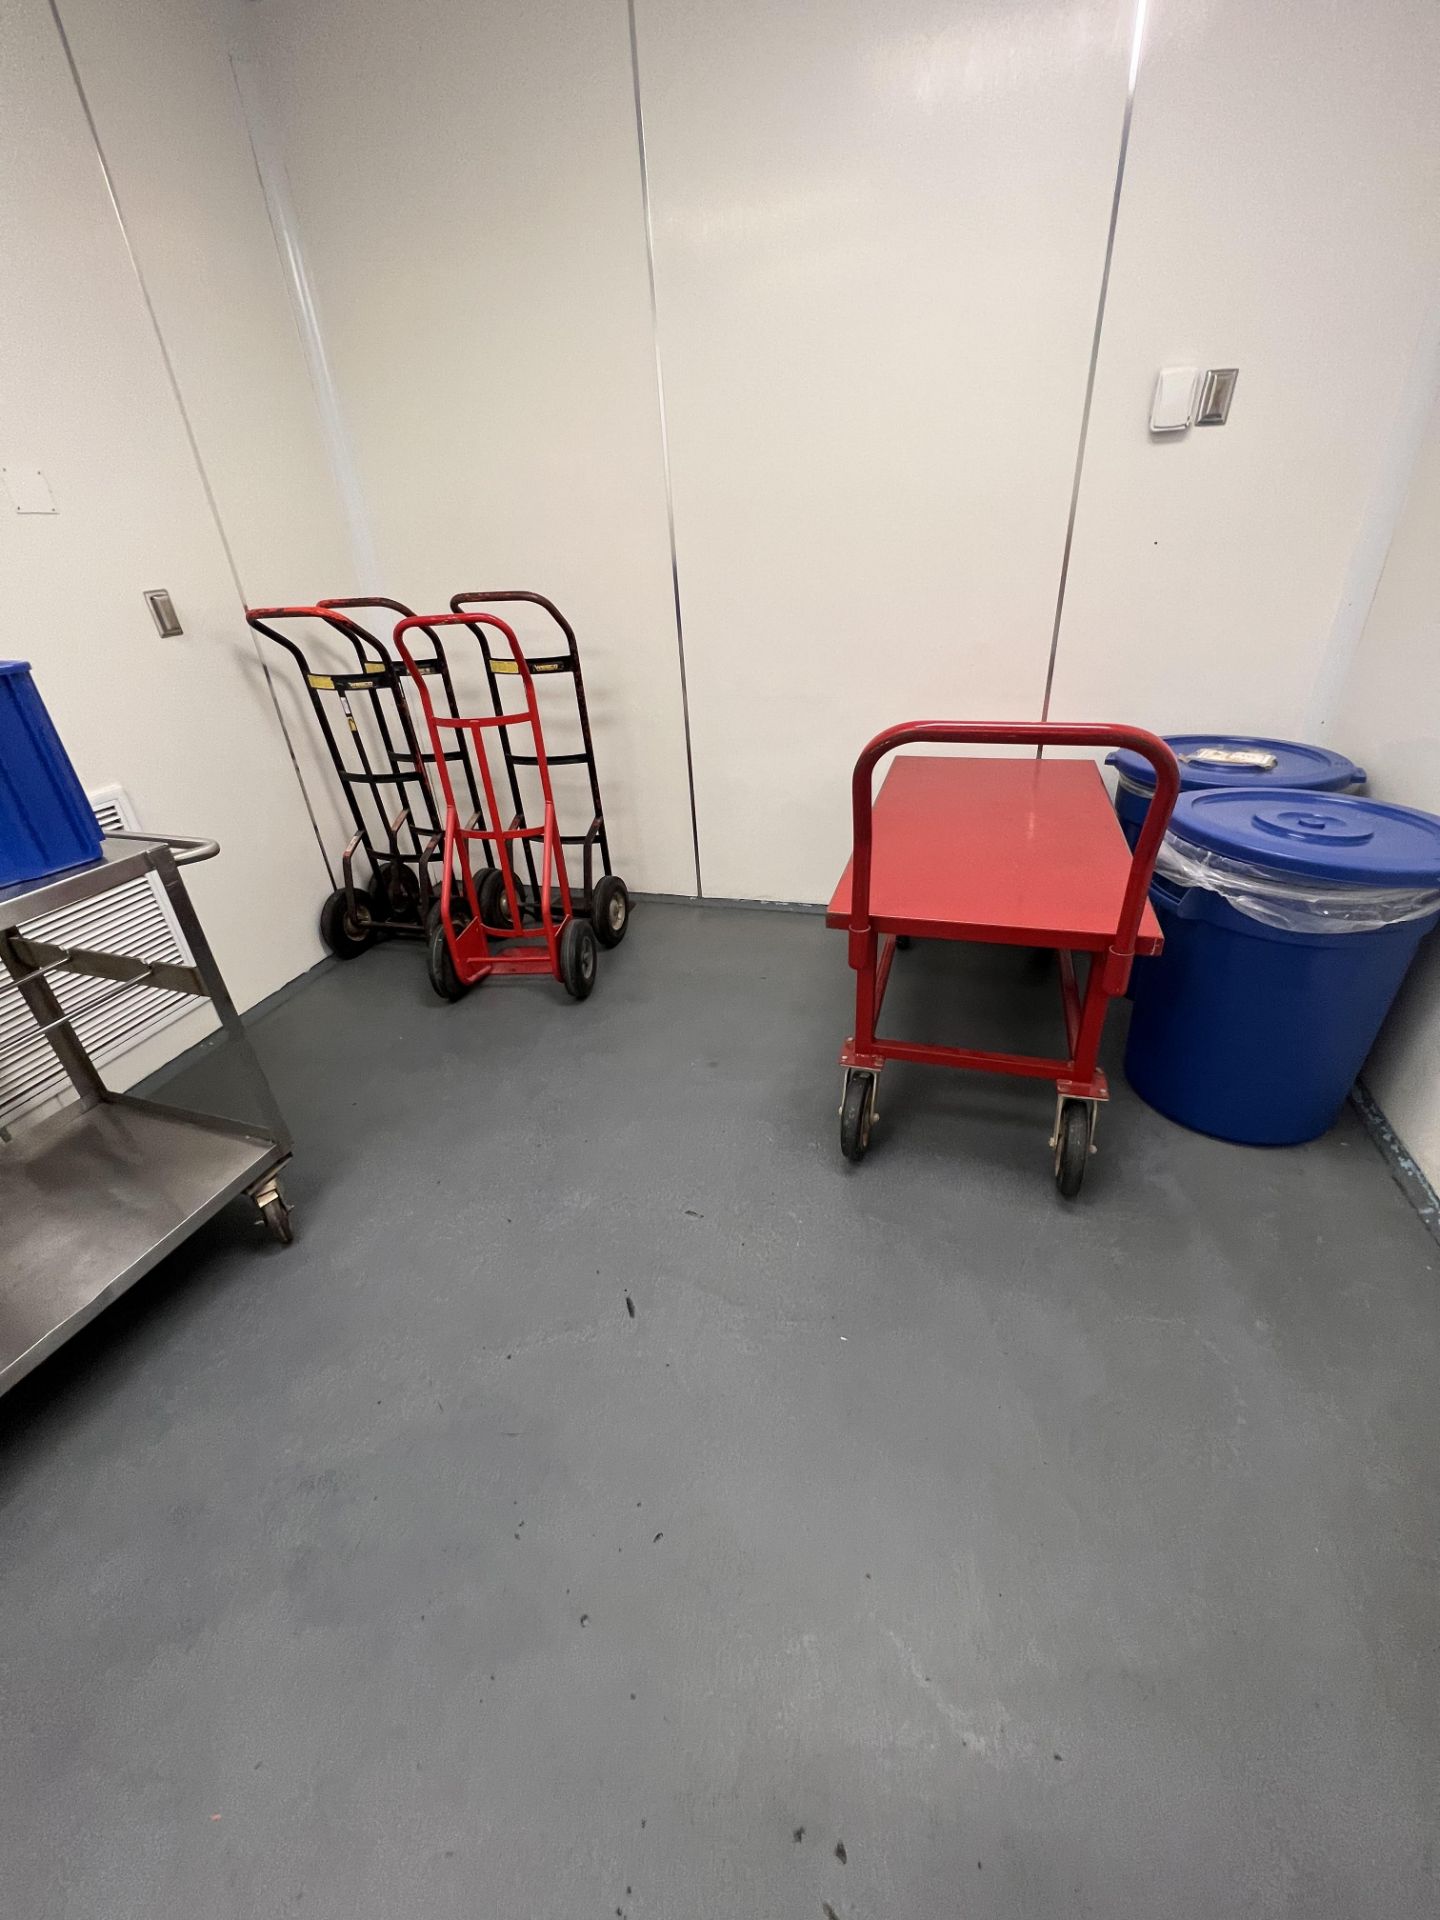 CONTENTS OF ROOM, INCLUDES DRYING RACKS, PUSH CARTS, DOLLIES (ROOM 20)